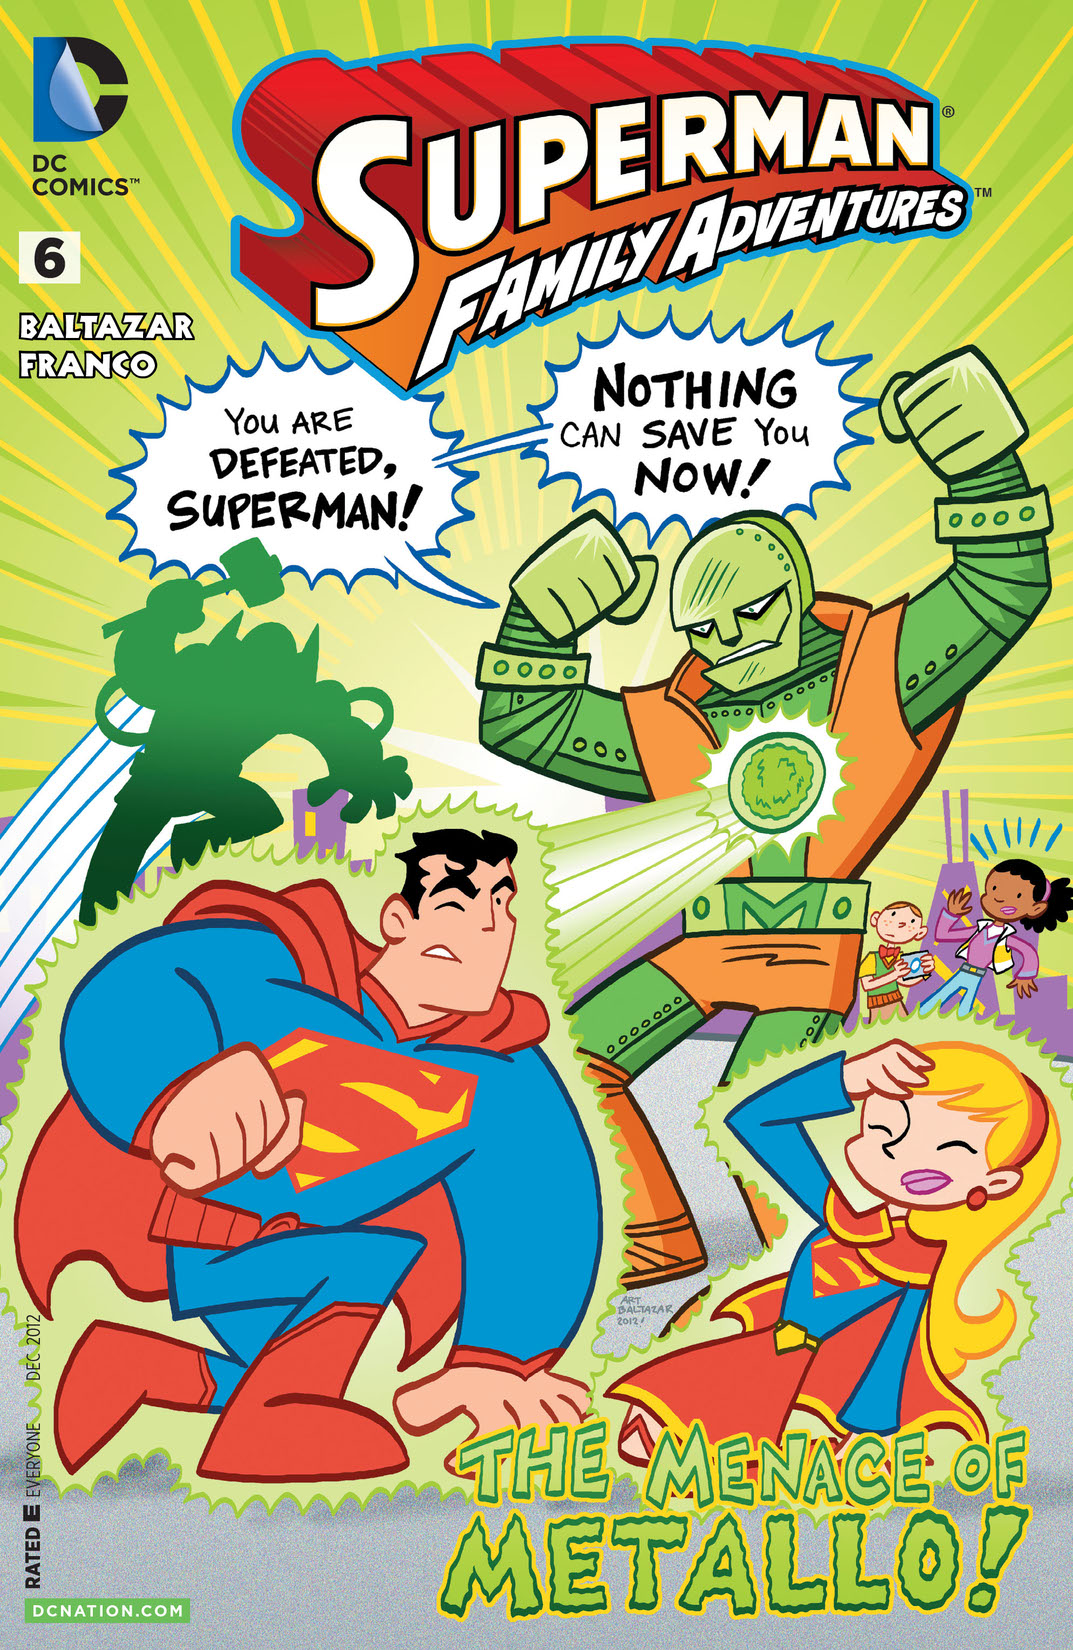 Superman Family Adventures #6 preview images